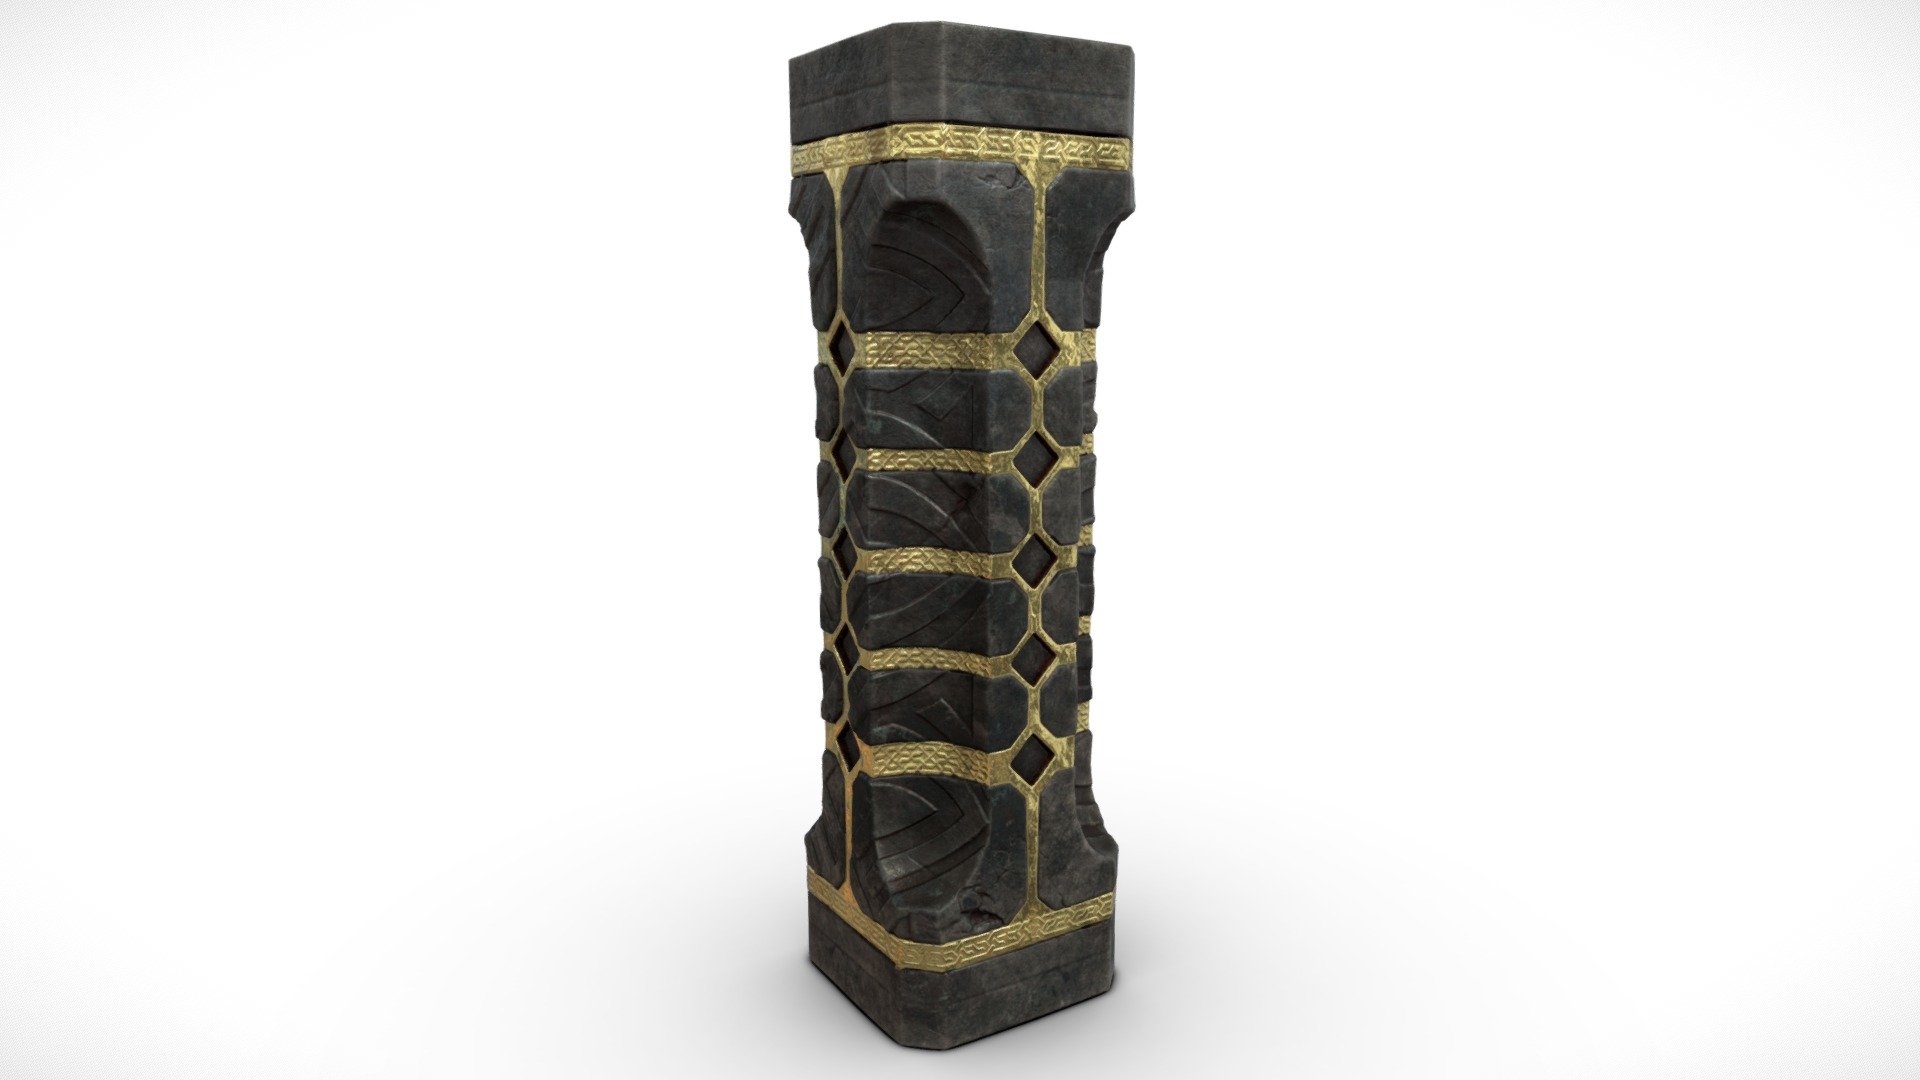 4096x4096 PBR textures:
Diffuse
Metallic
Roughness
Normal
Ambient Occlusion - Dwarven Medieval Fantasy Pillar Column - Buy Royalty Free 3D model by Davis3D 3d model